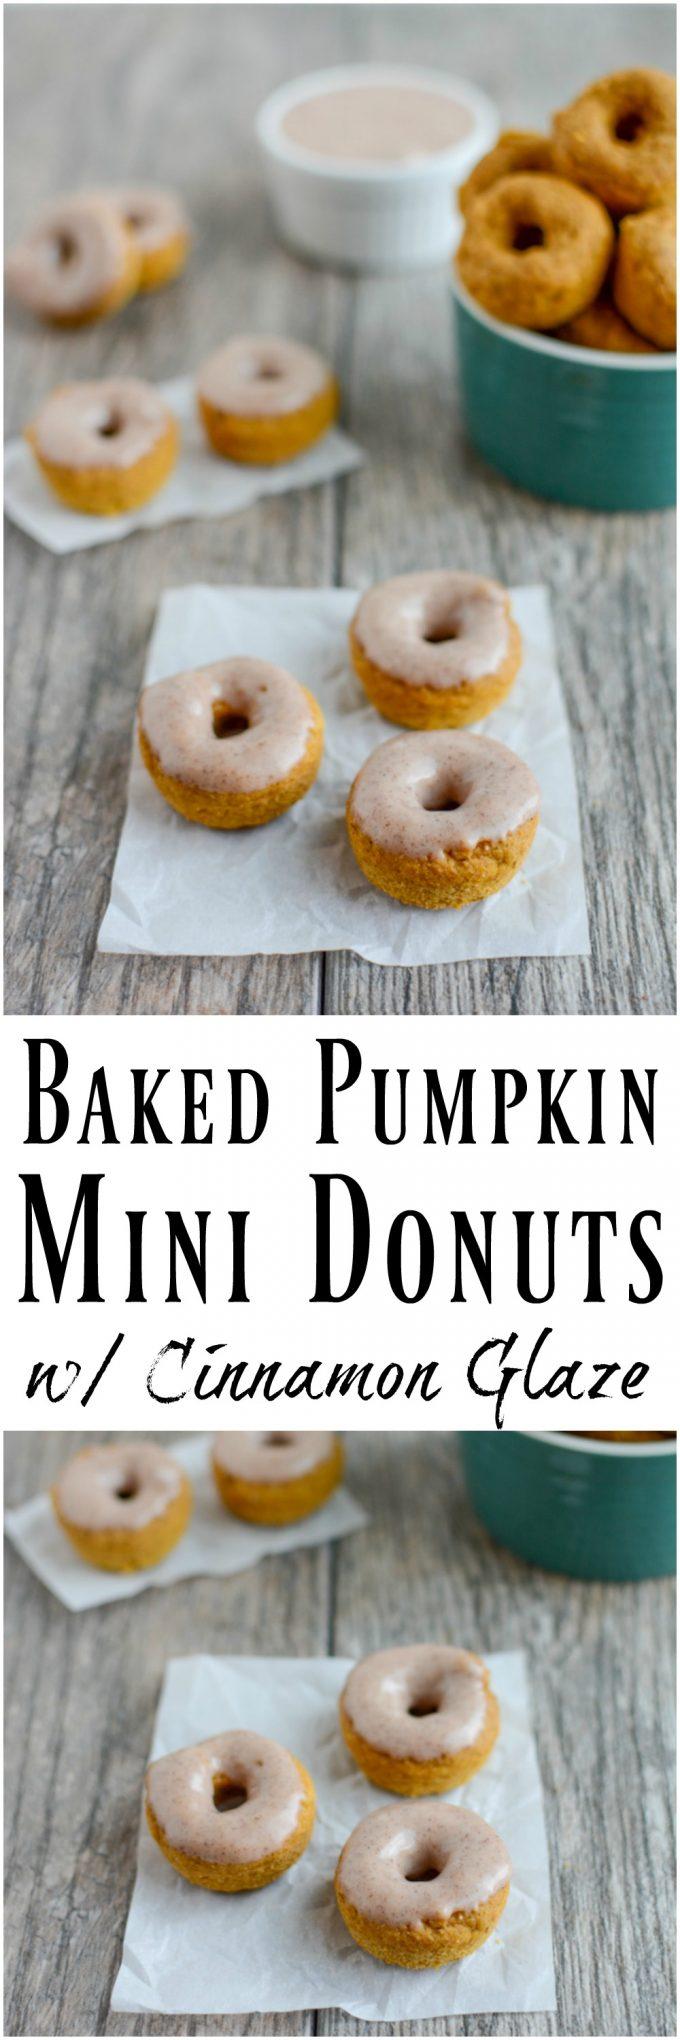 Make these Baked Pumpkin Donuts for a weekend breakfast treat or a fun dessert Enjoy them plain or with an easy cinnamon glaze.